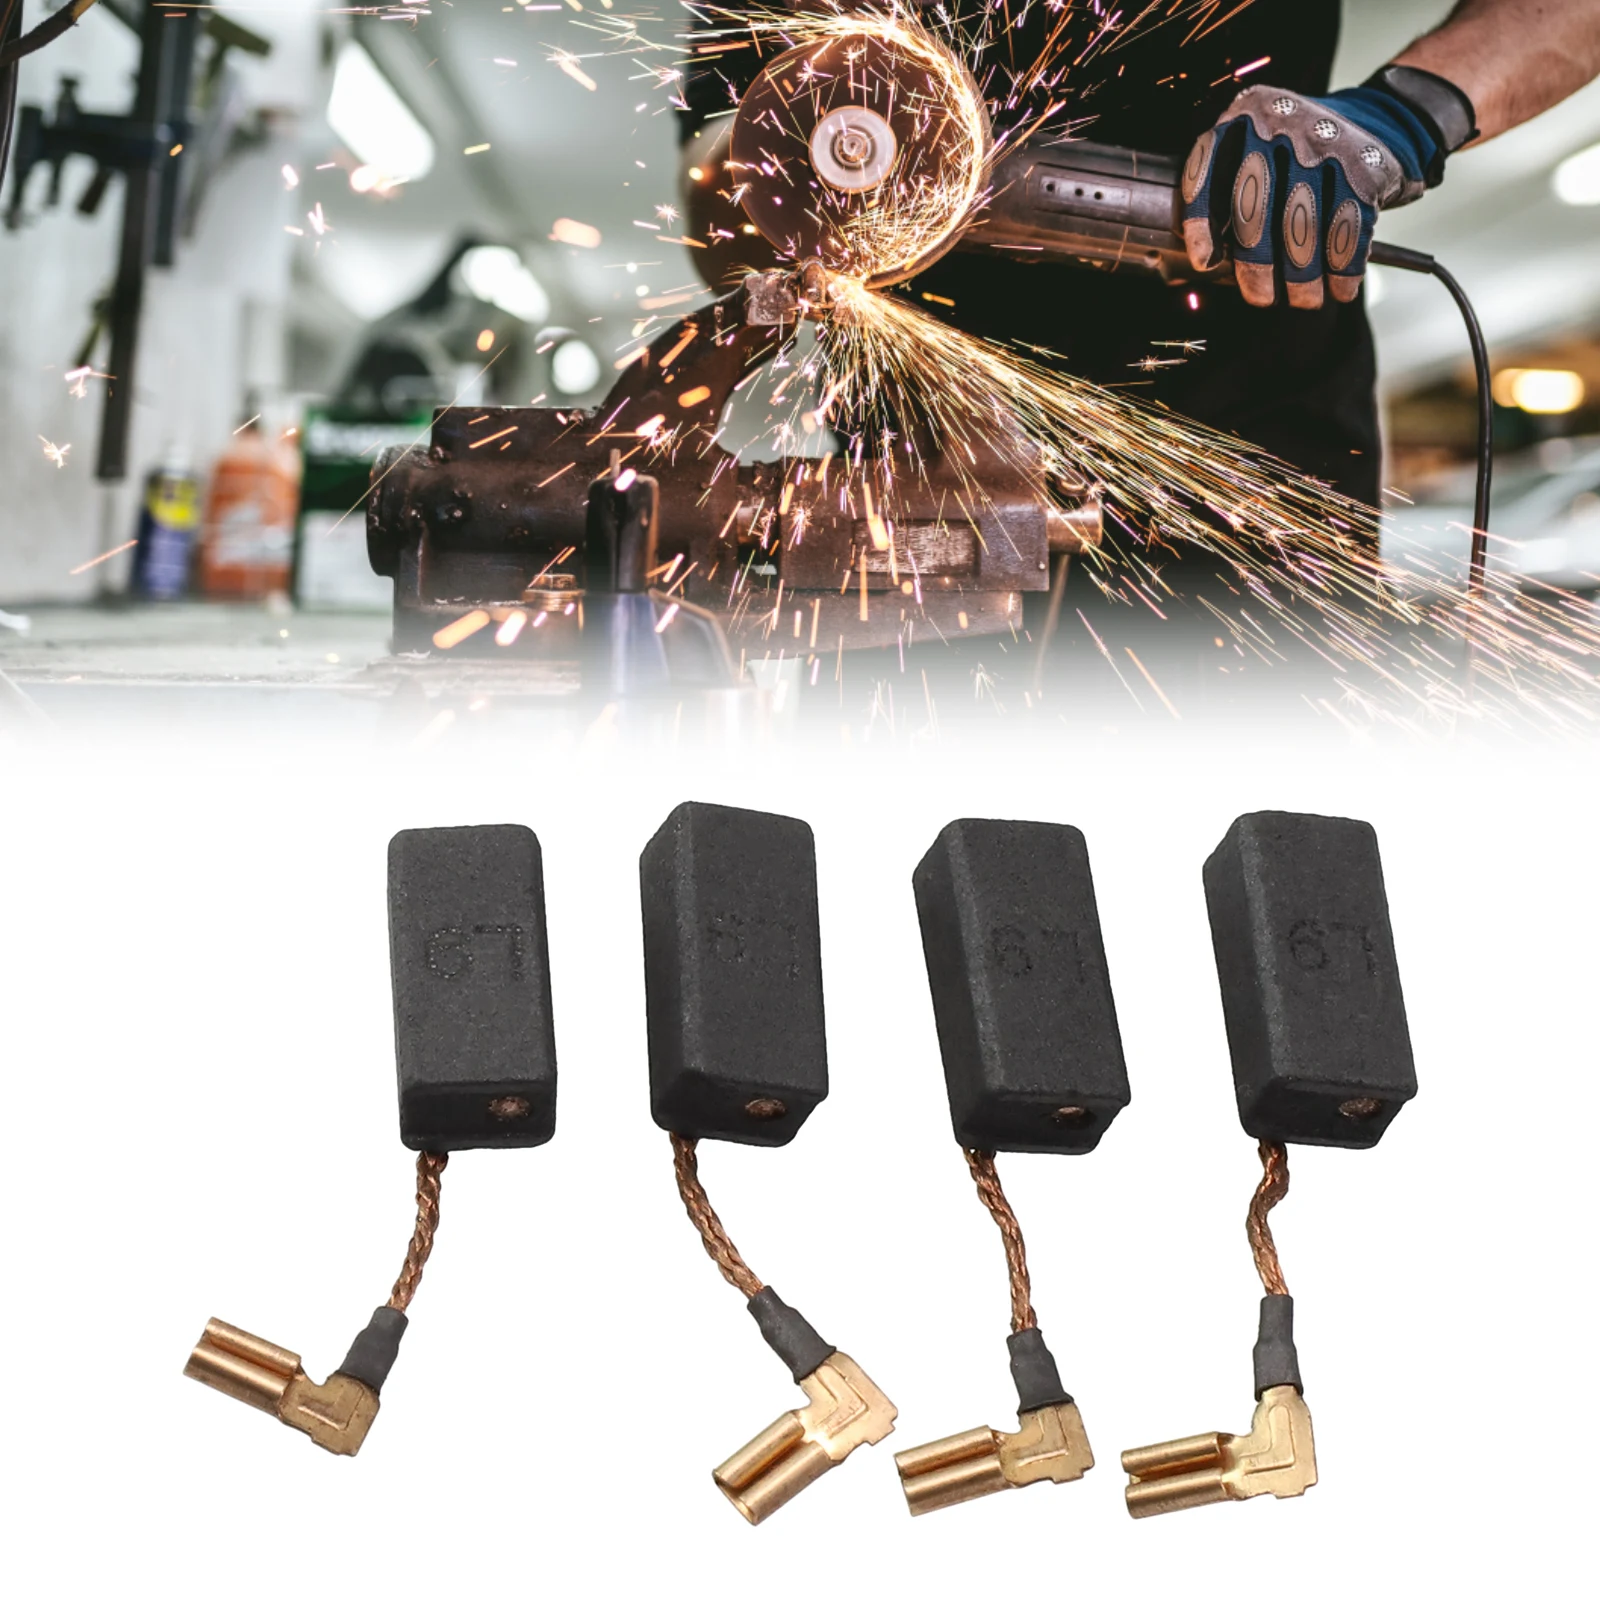 4pcs Carbon Motor Brush DWE4120 DWE4011 N097696 Grinder Motor Replacement Part High Quality Carbon Brushes Durable And Practical a2f107w2z2 hydraulic motor a2f107 high speed zhenyuan piston motor economic and durable